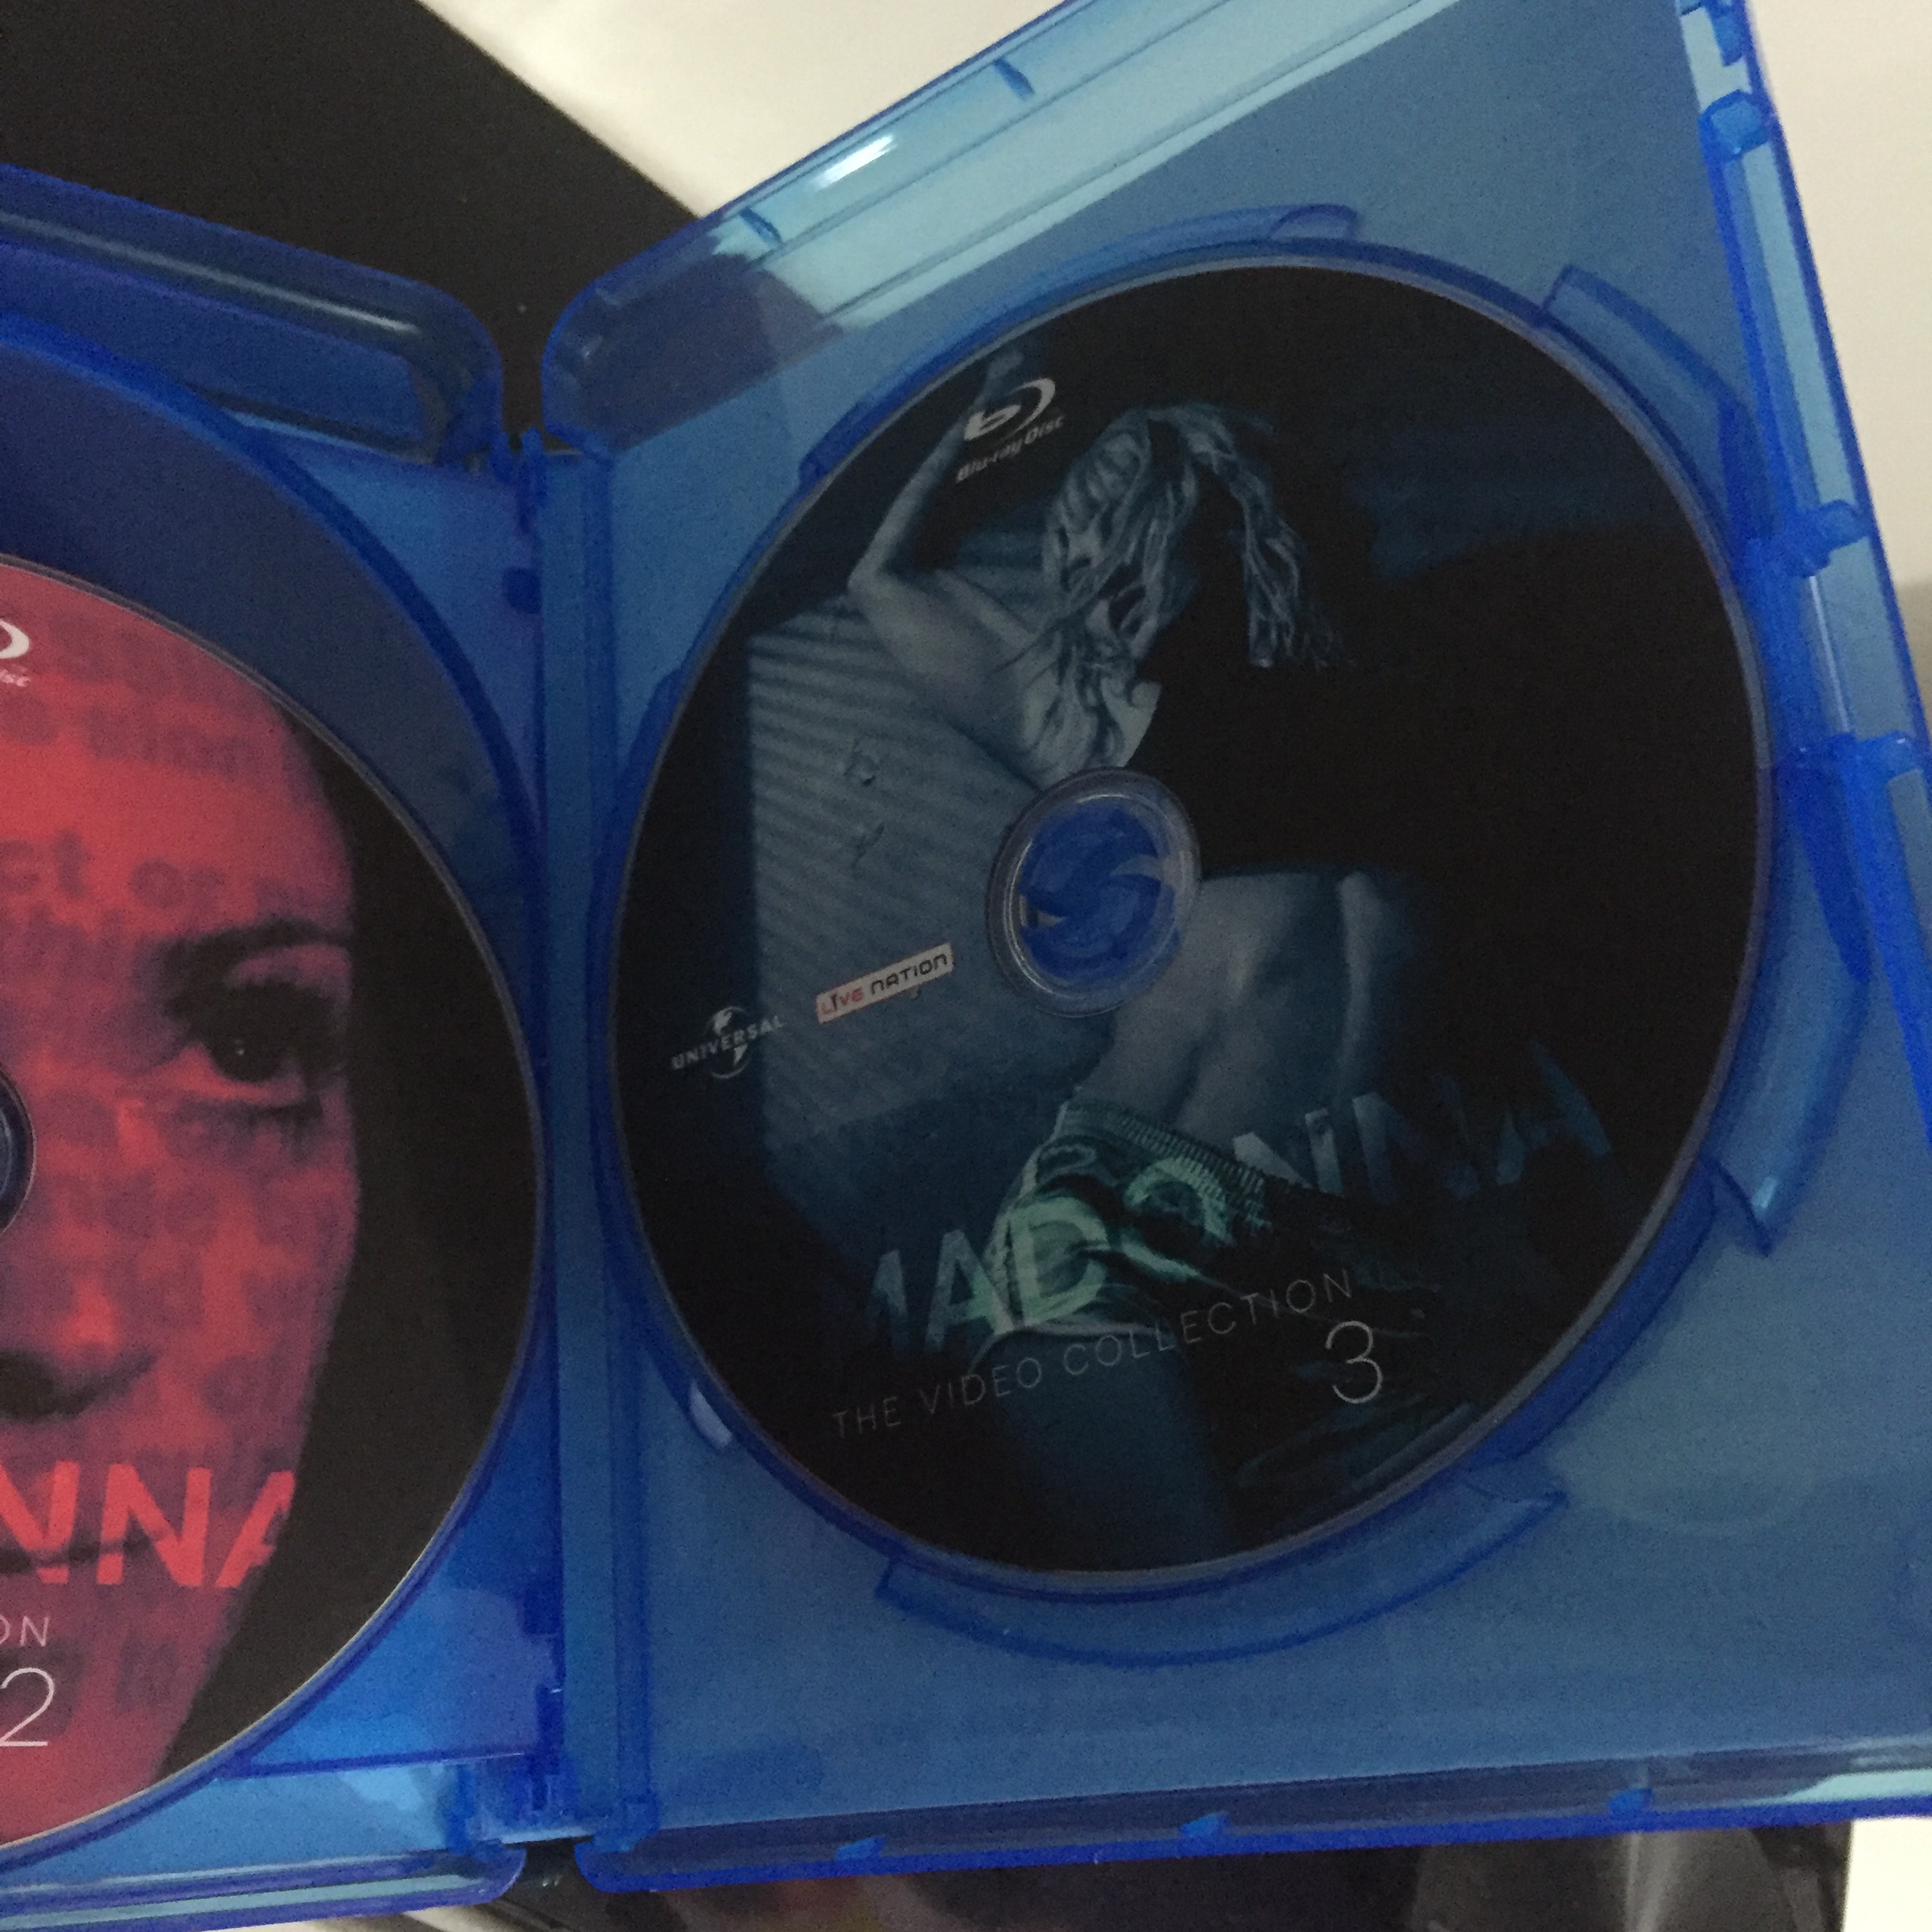 blu-ray Madonna Video Collection5